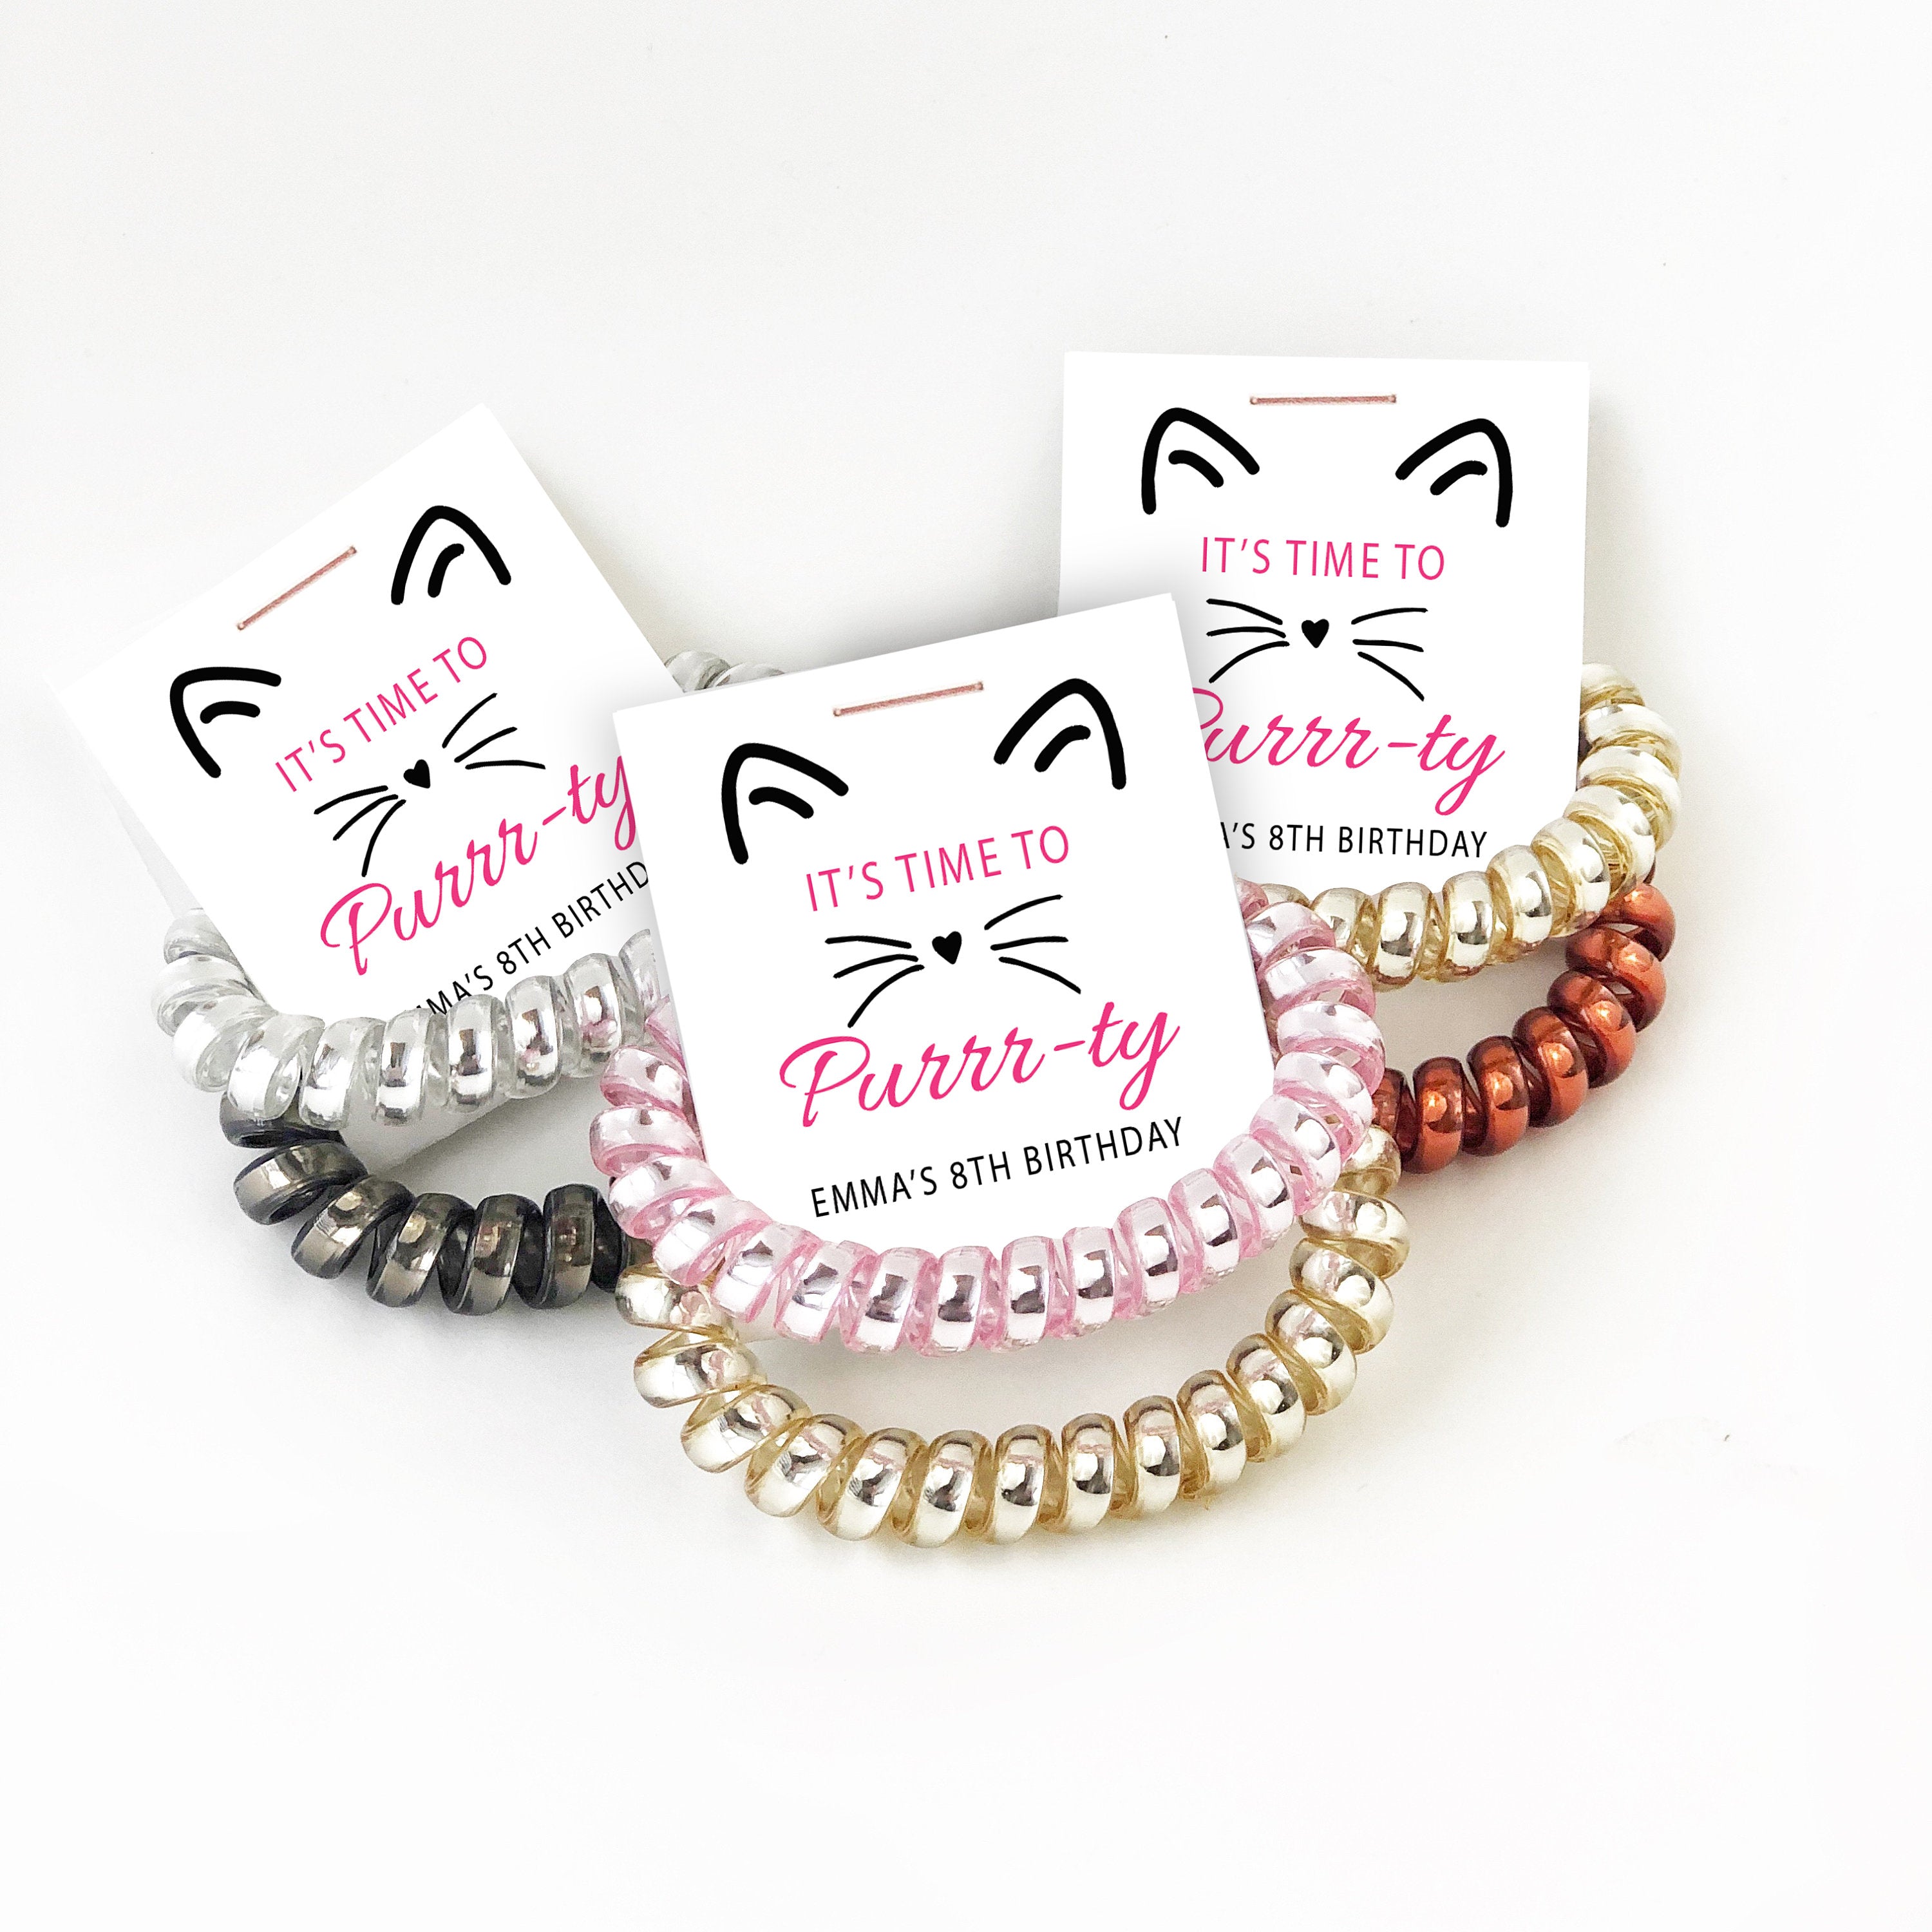 Cat Birthday Party Favors, Spiral Hair Ties, Kitty Cat Party Favors - @PlumPolkaDot 